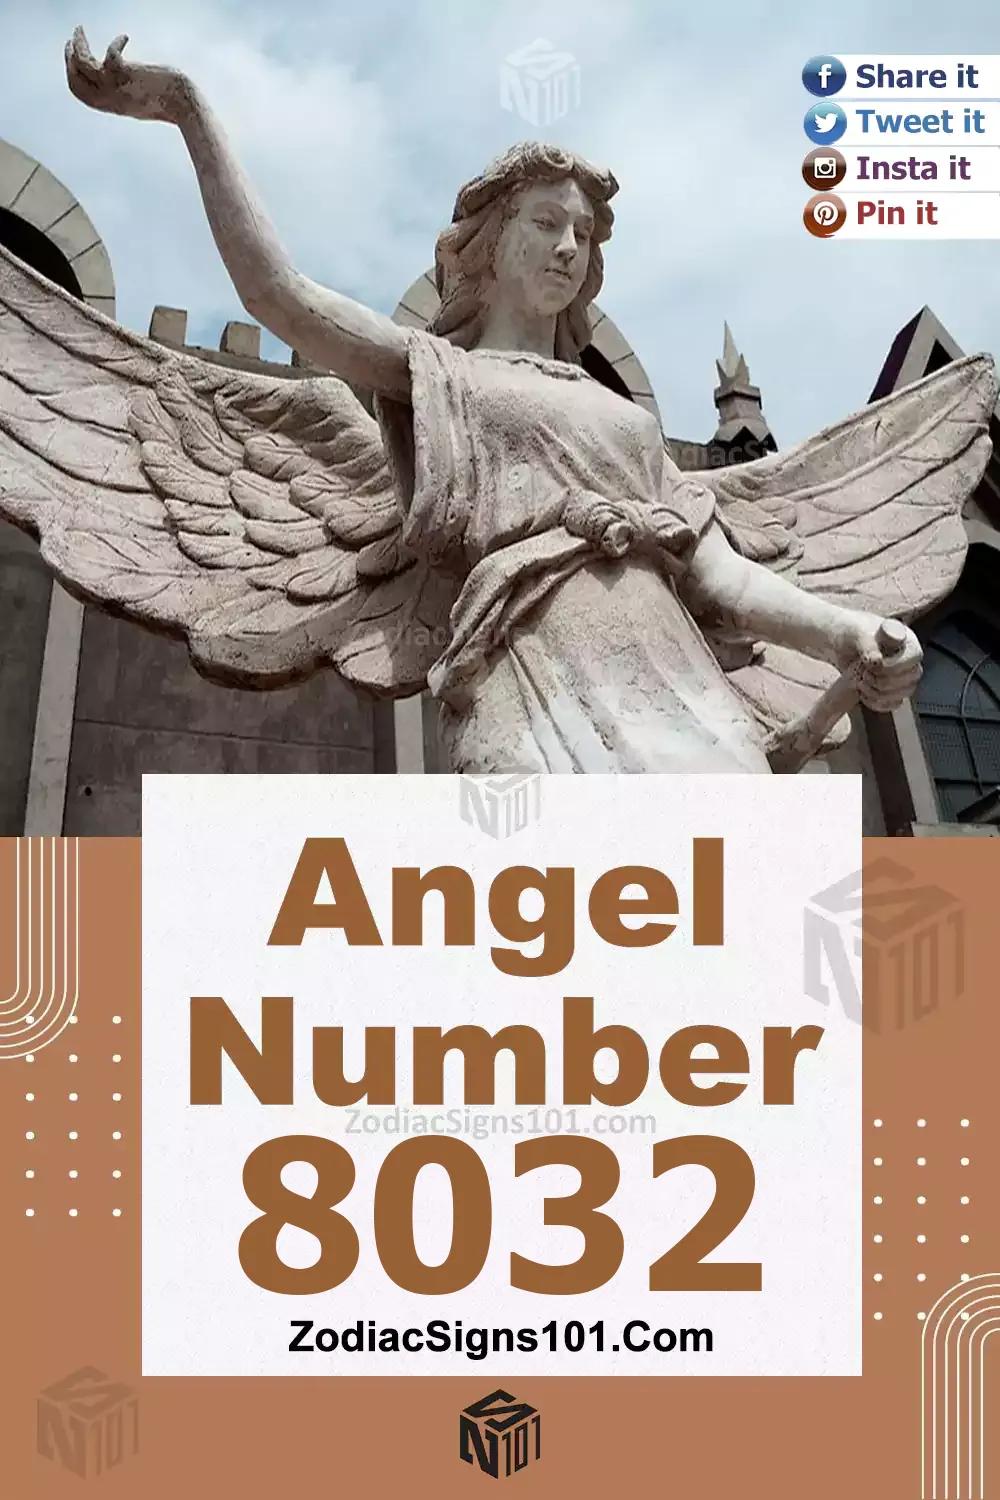 8032 Angel Number Meaning